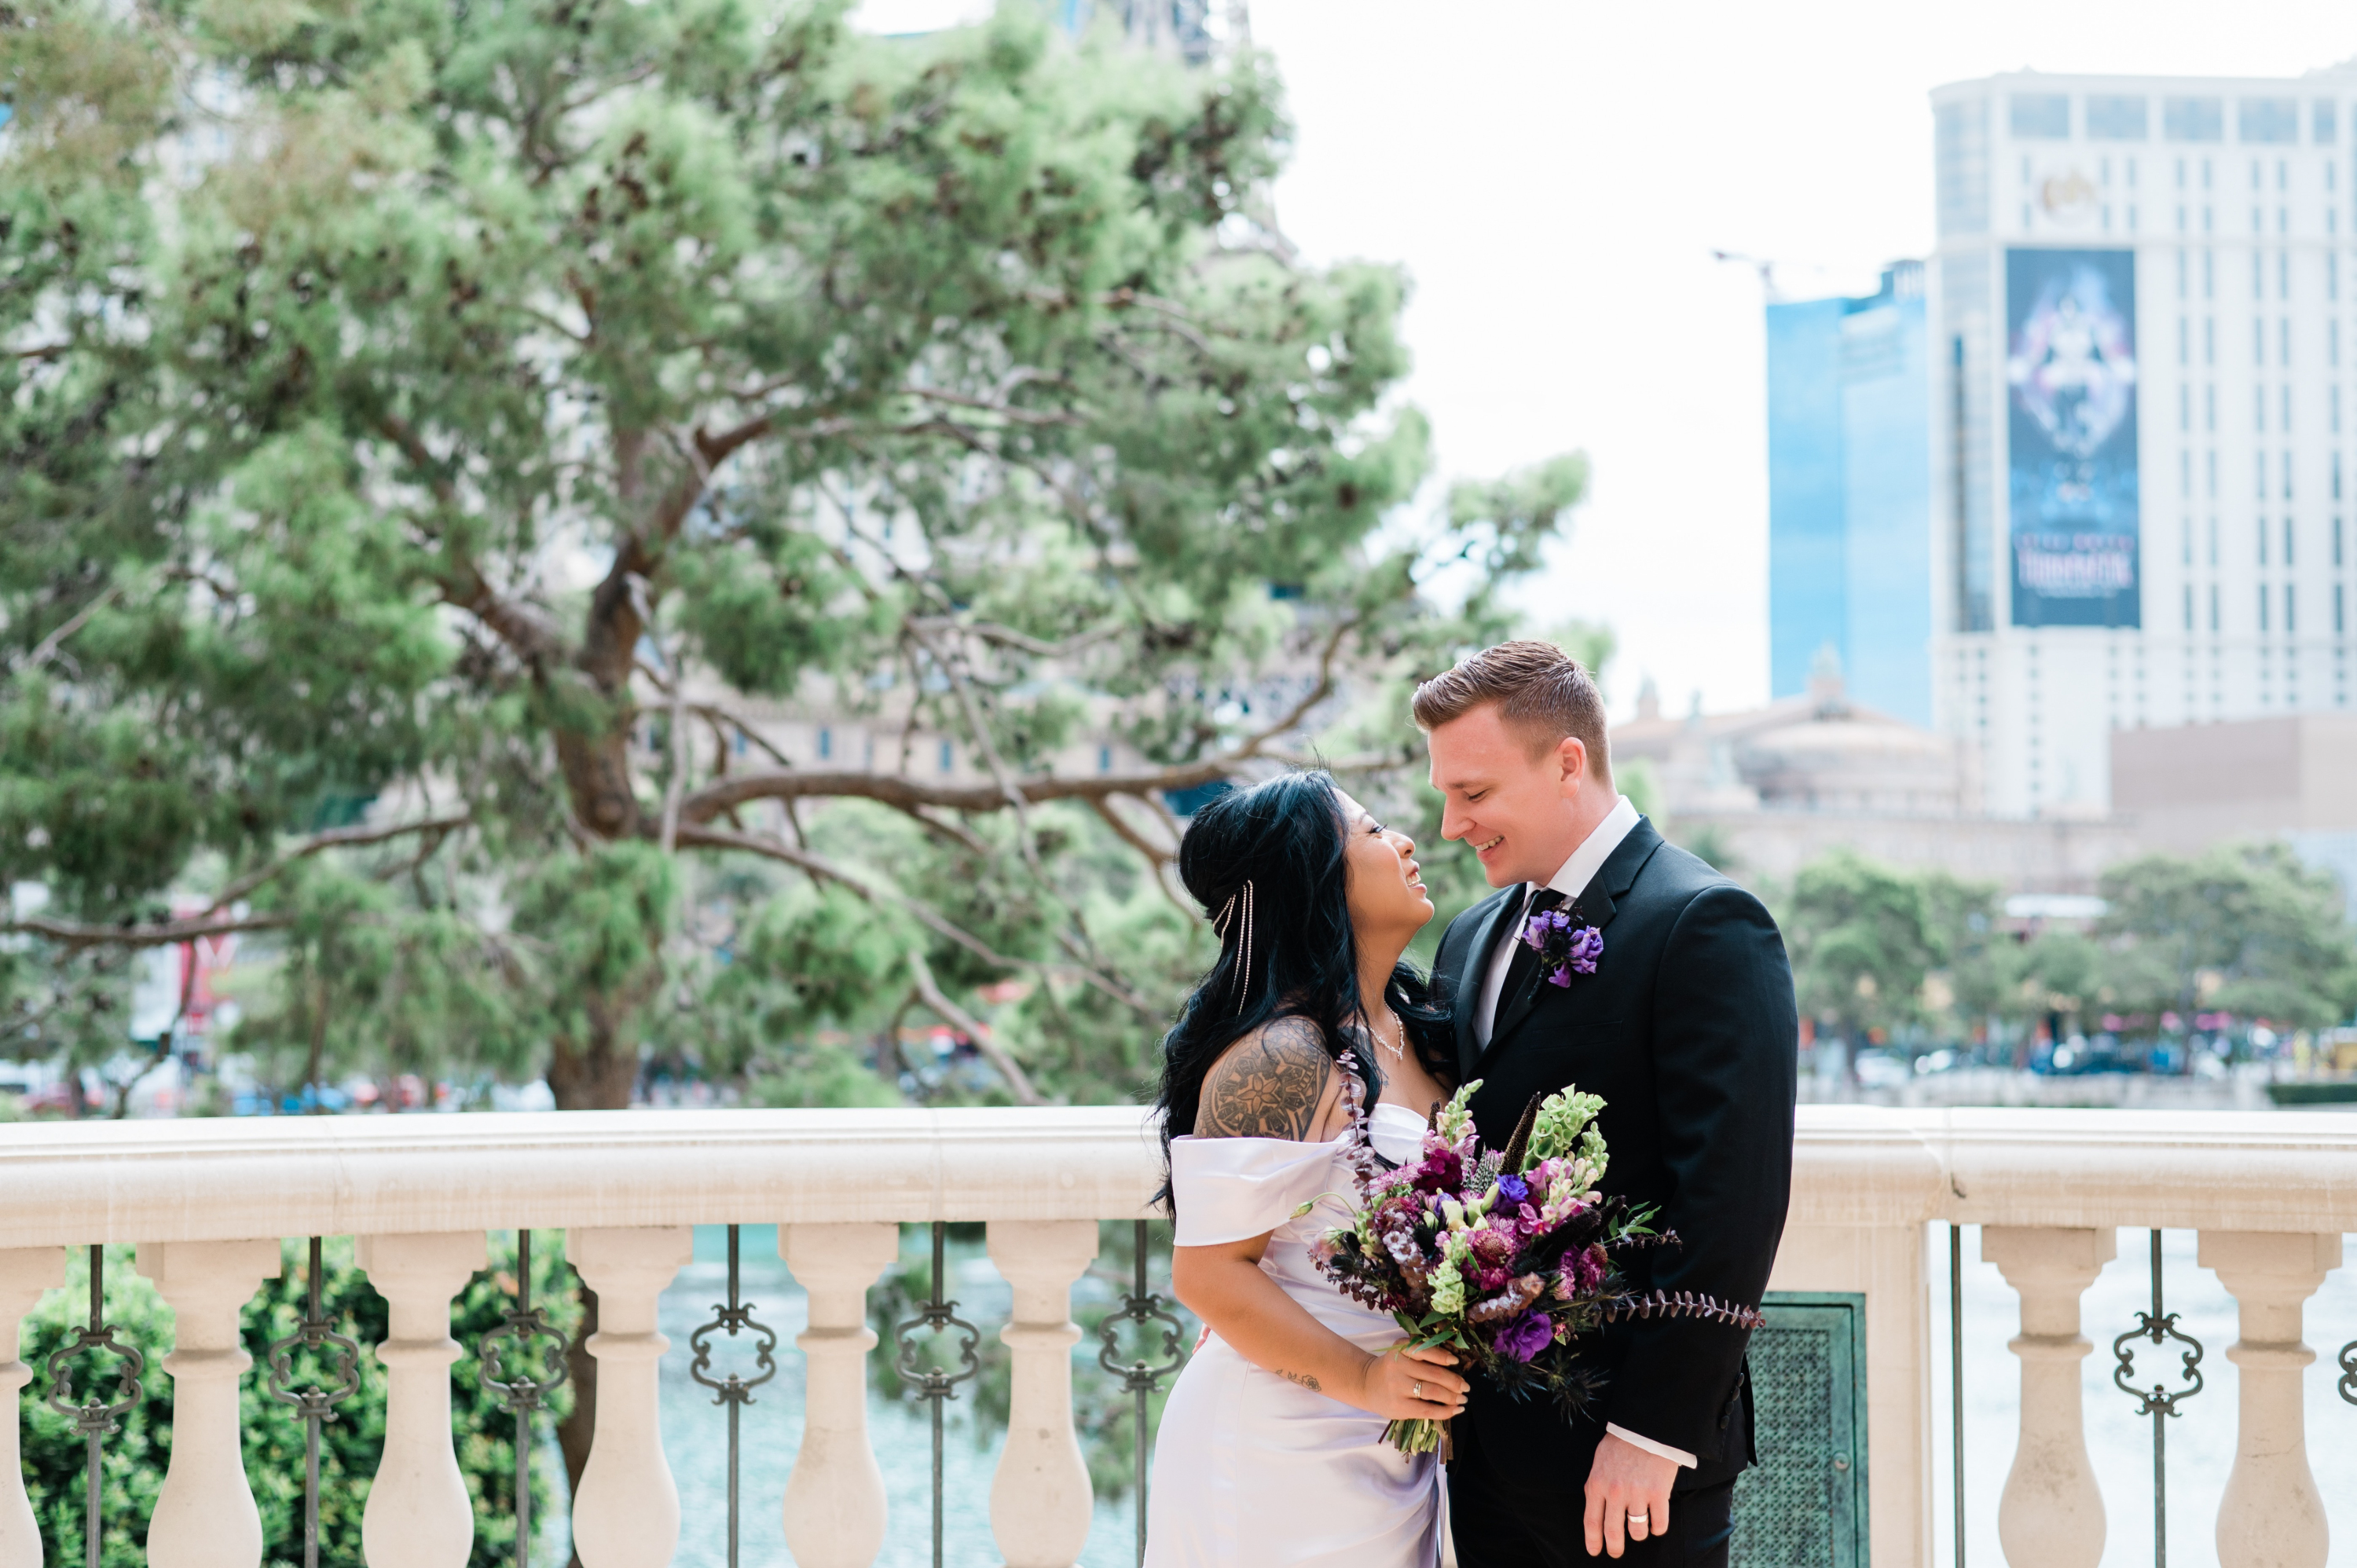 Bride and groom gazing into each others eyes during their wedding ceremony at the Bellagio in Las Vegas.